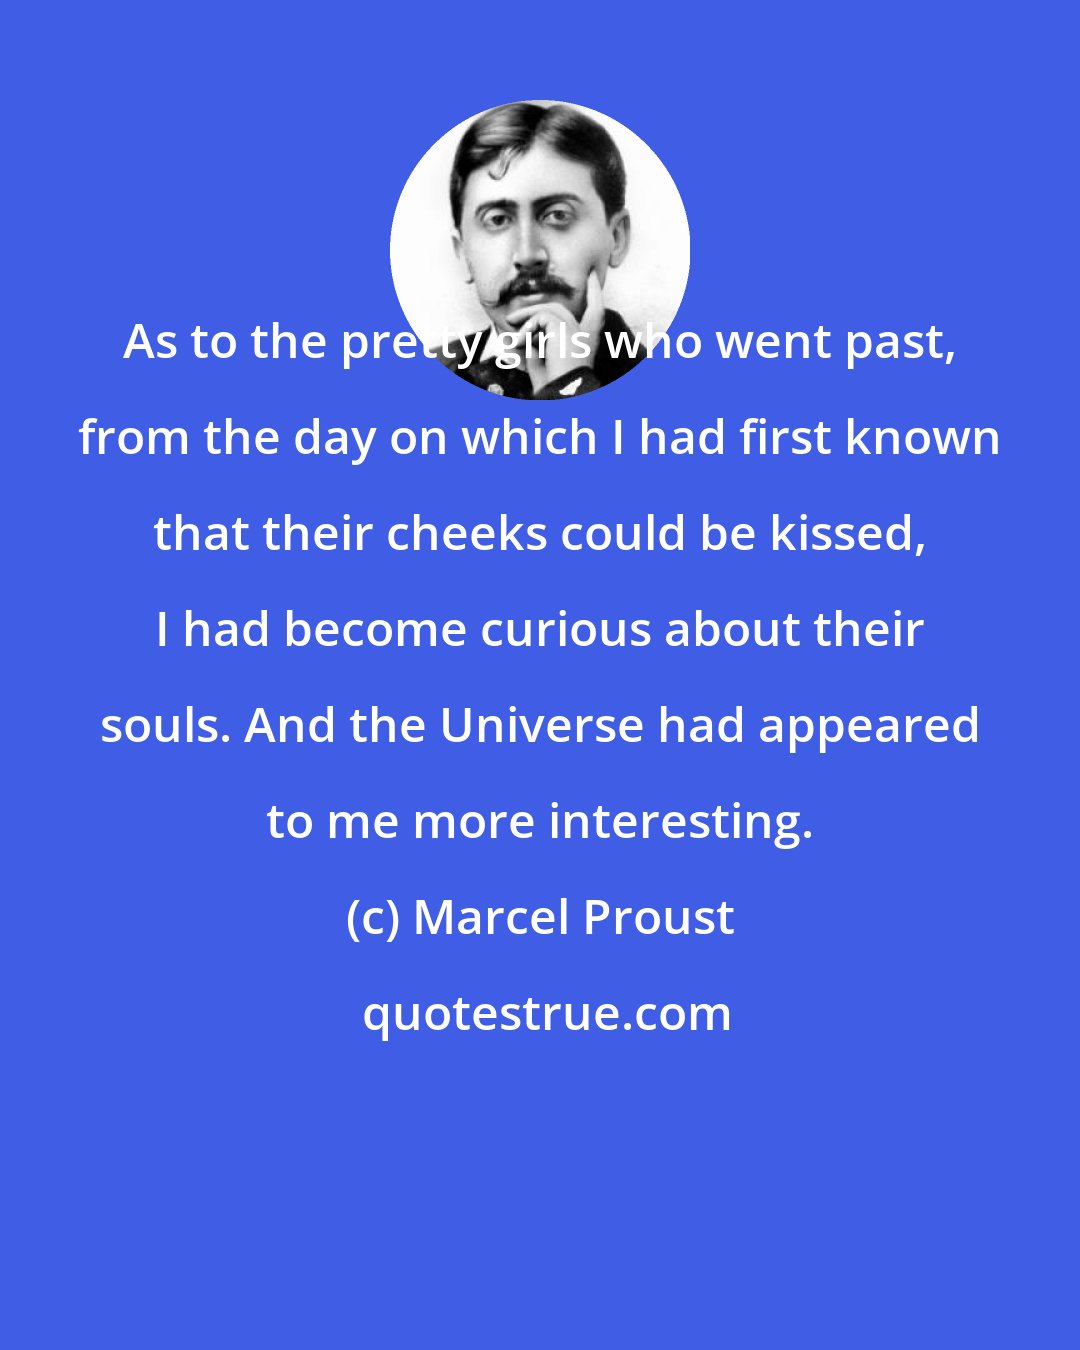 Marcel Proust: As to the pretty girls who went past, from the day on which I had first known that their cheeks could be kissed, I had become curious about their souls. And the Universe had appeared to me more interesting.